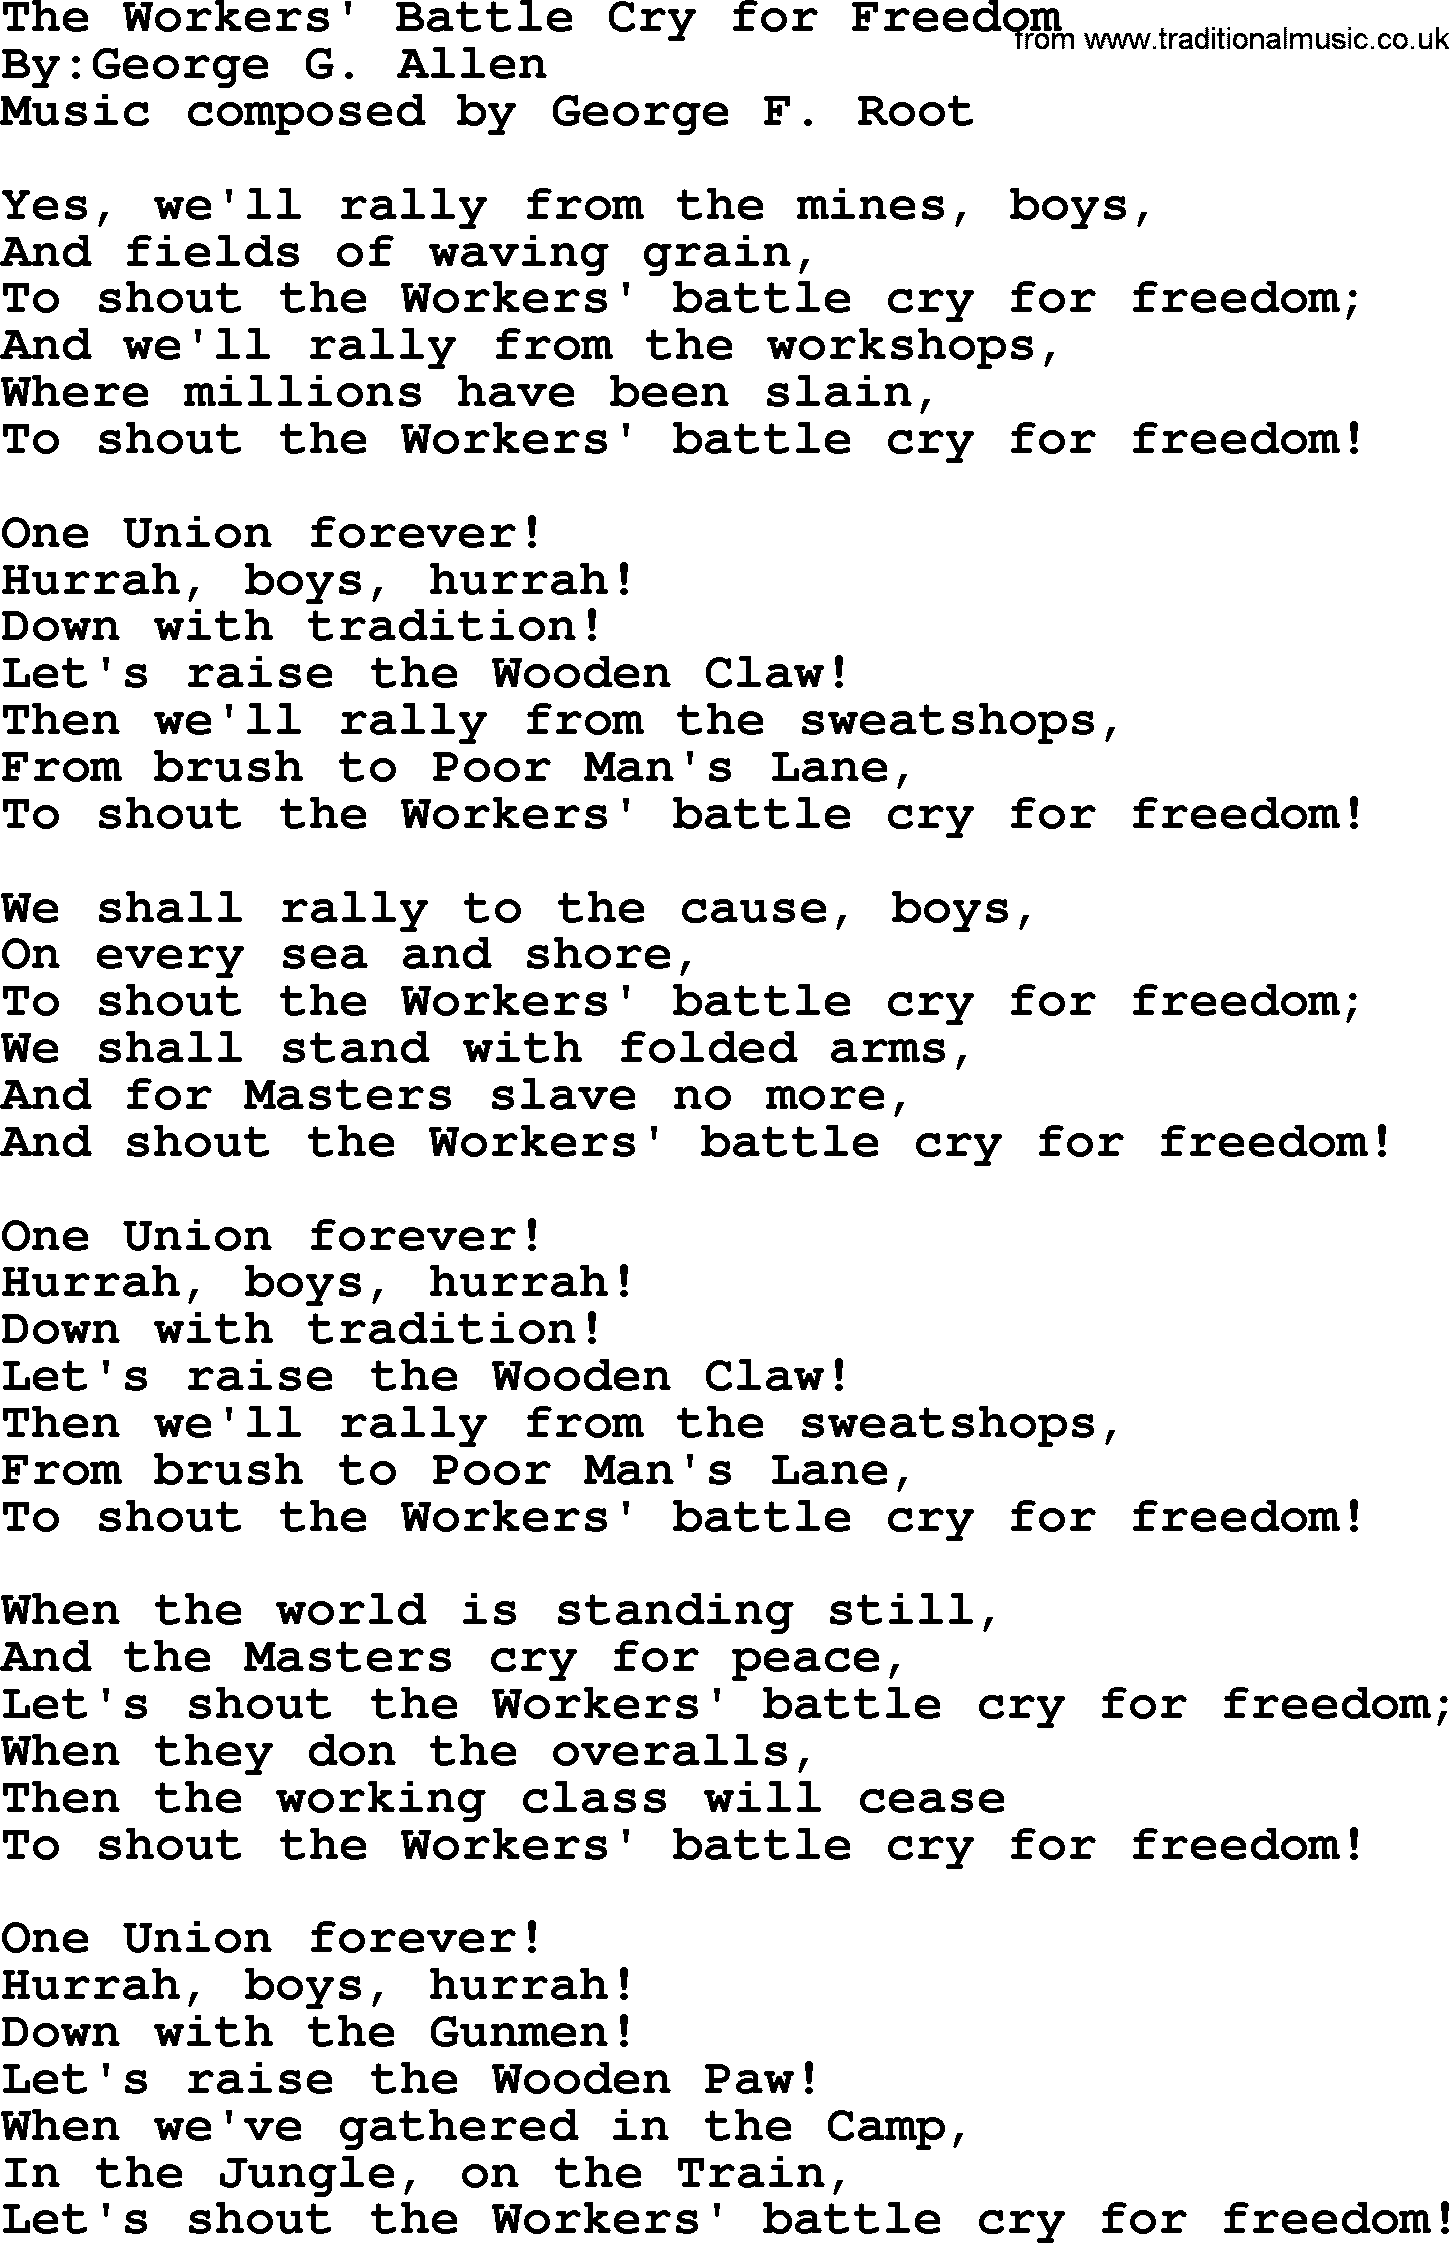 Political, Solidarity, Workers or Union song: The Workers Battle Cry For Freedom, lyrics